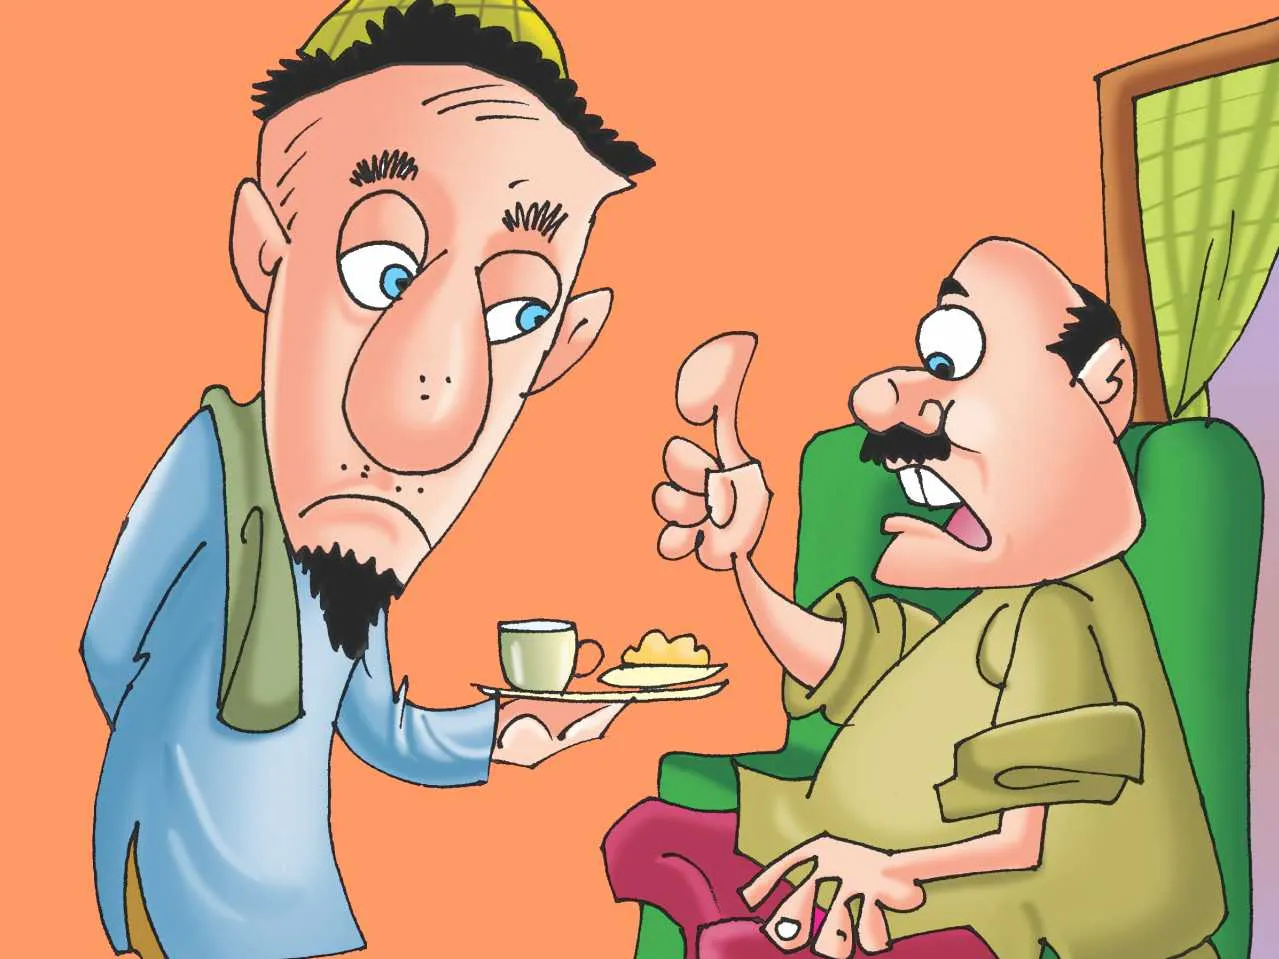 servant giving tea to owner cartoon image